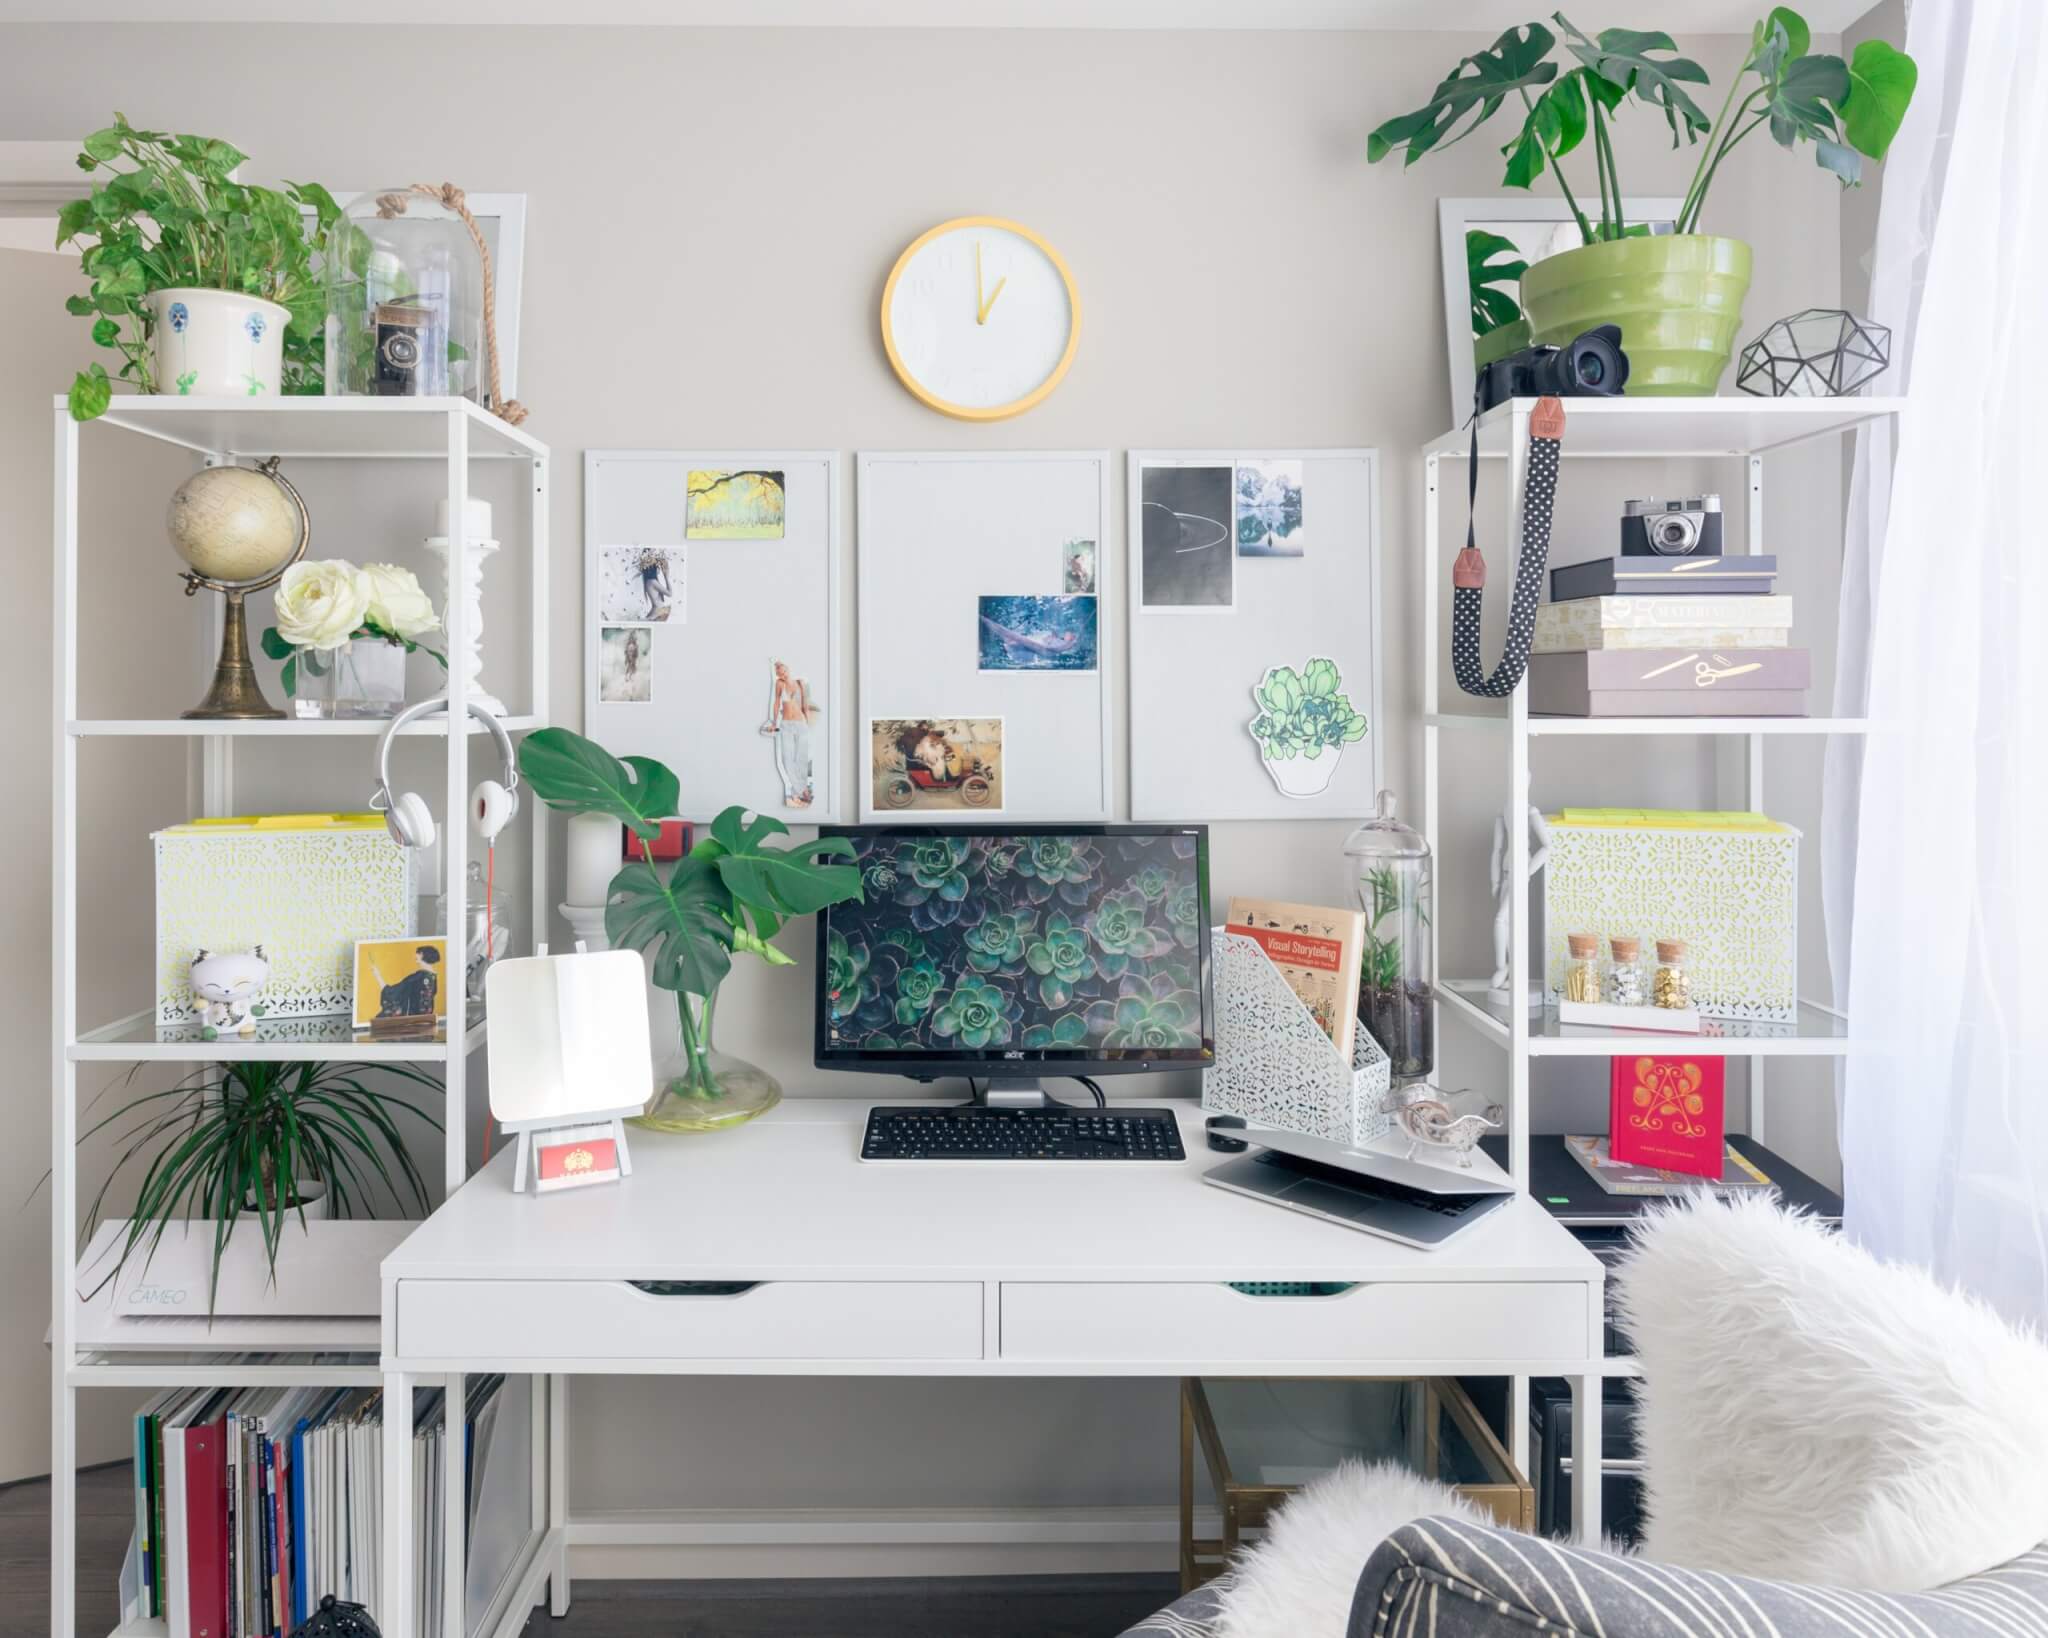 Desk surrounded by plants